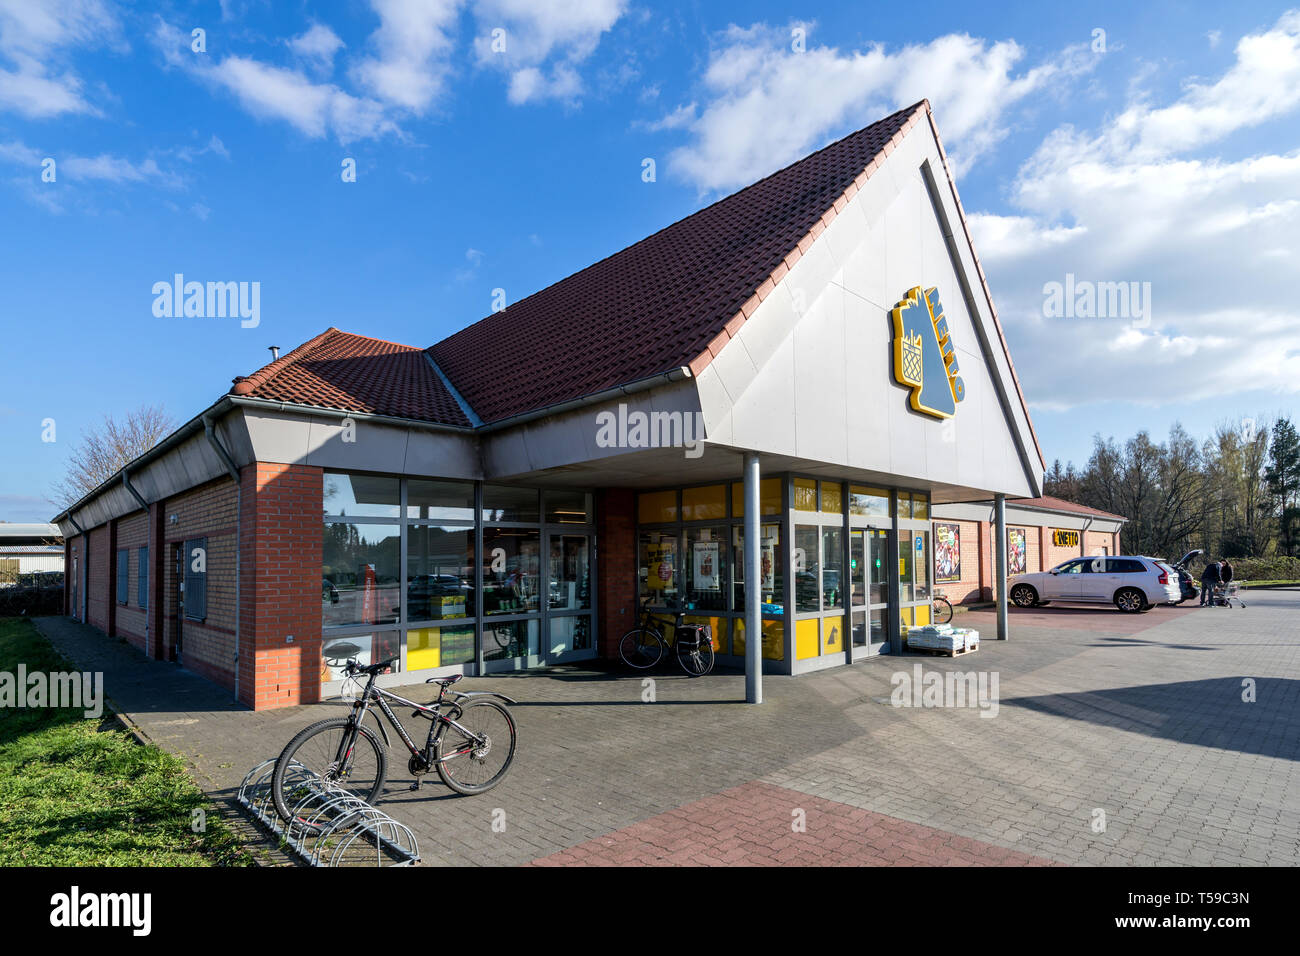 Netto Lebensmitteldiscounter branch in Quickborn, Germany. Netto is a Danish discount supermarket operating in Denmark, Germany, Poland and Sweden. Stock Photo